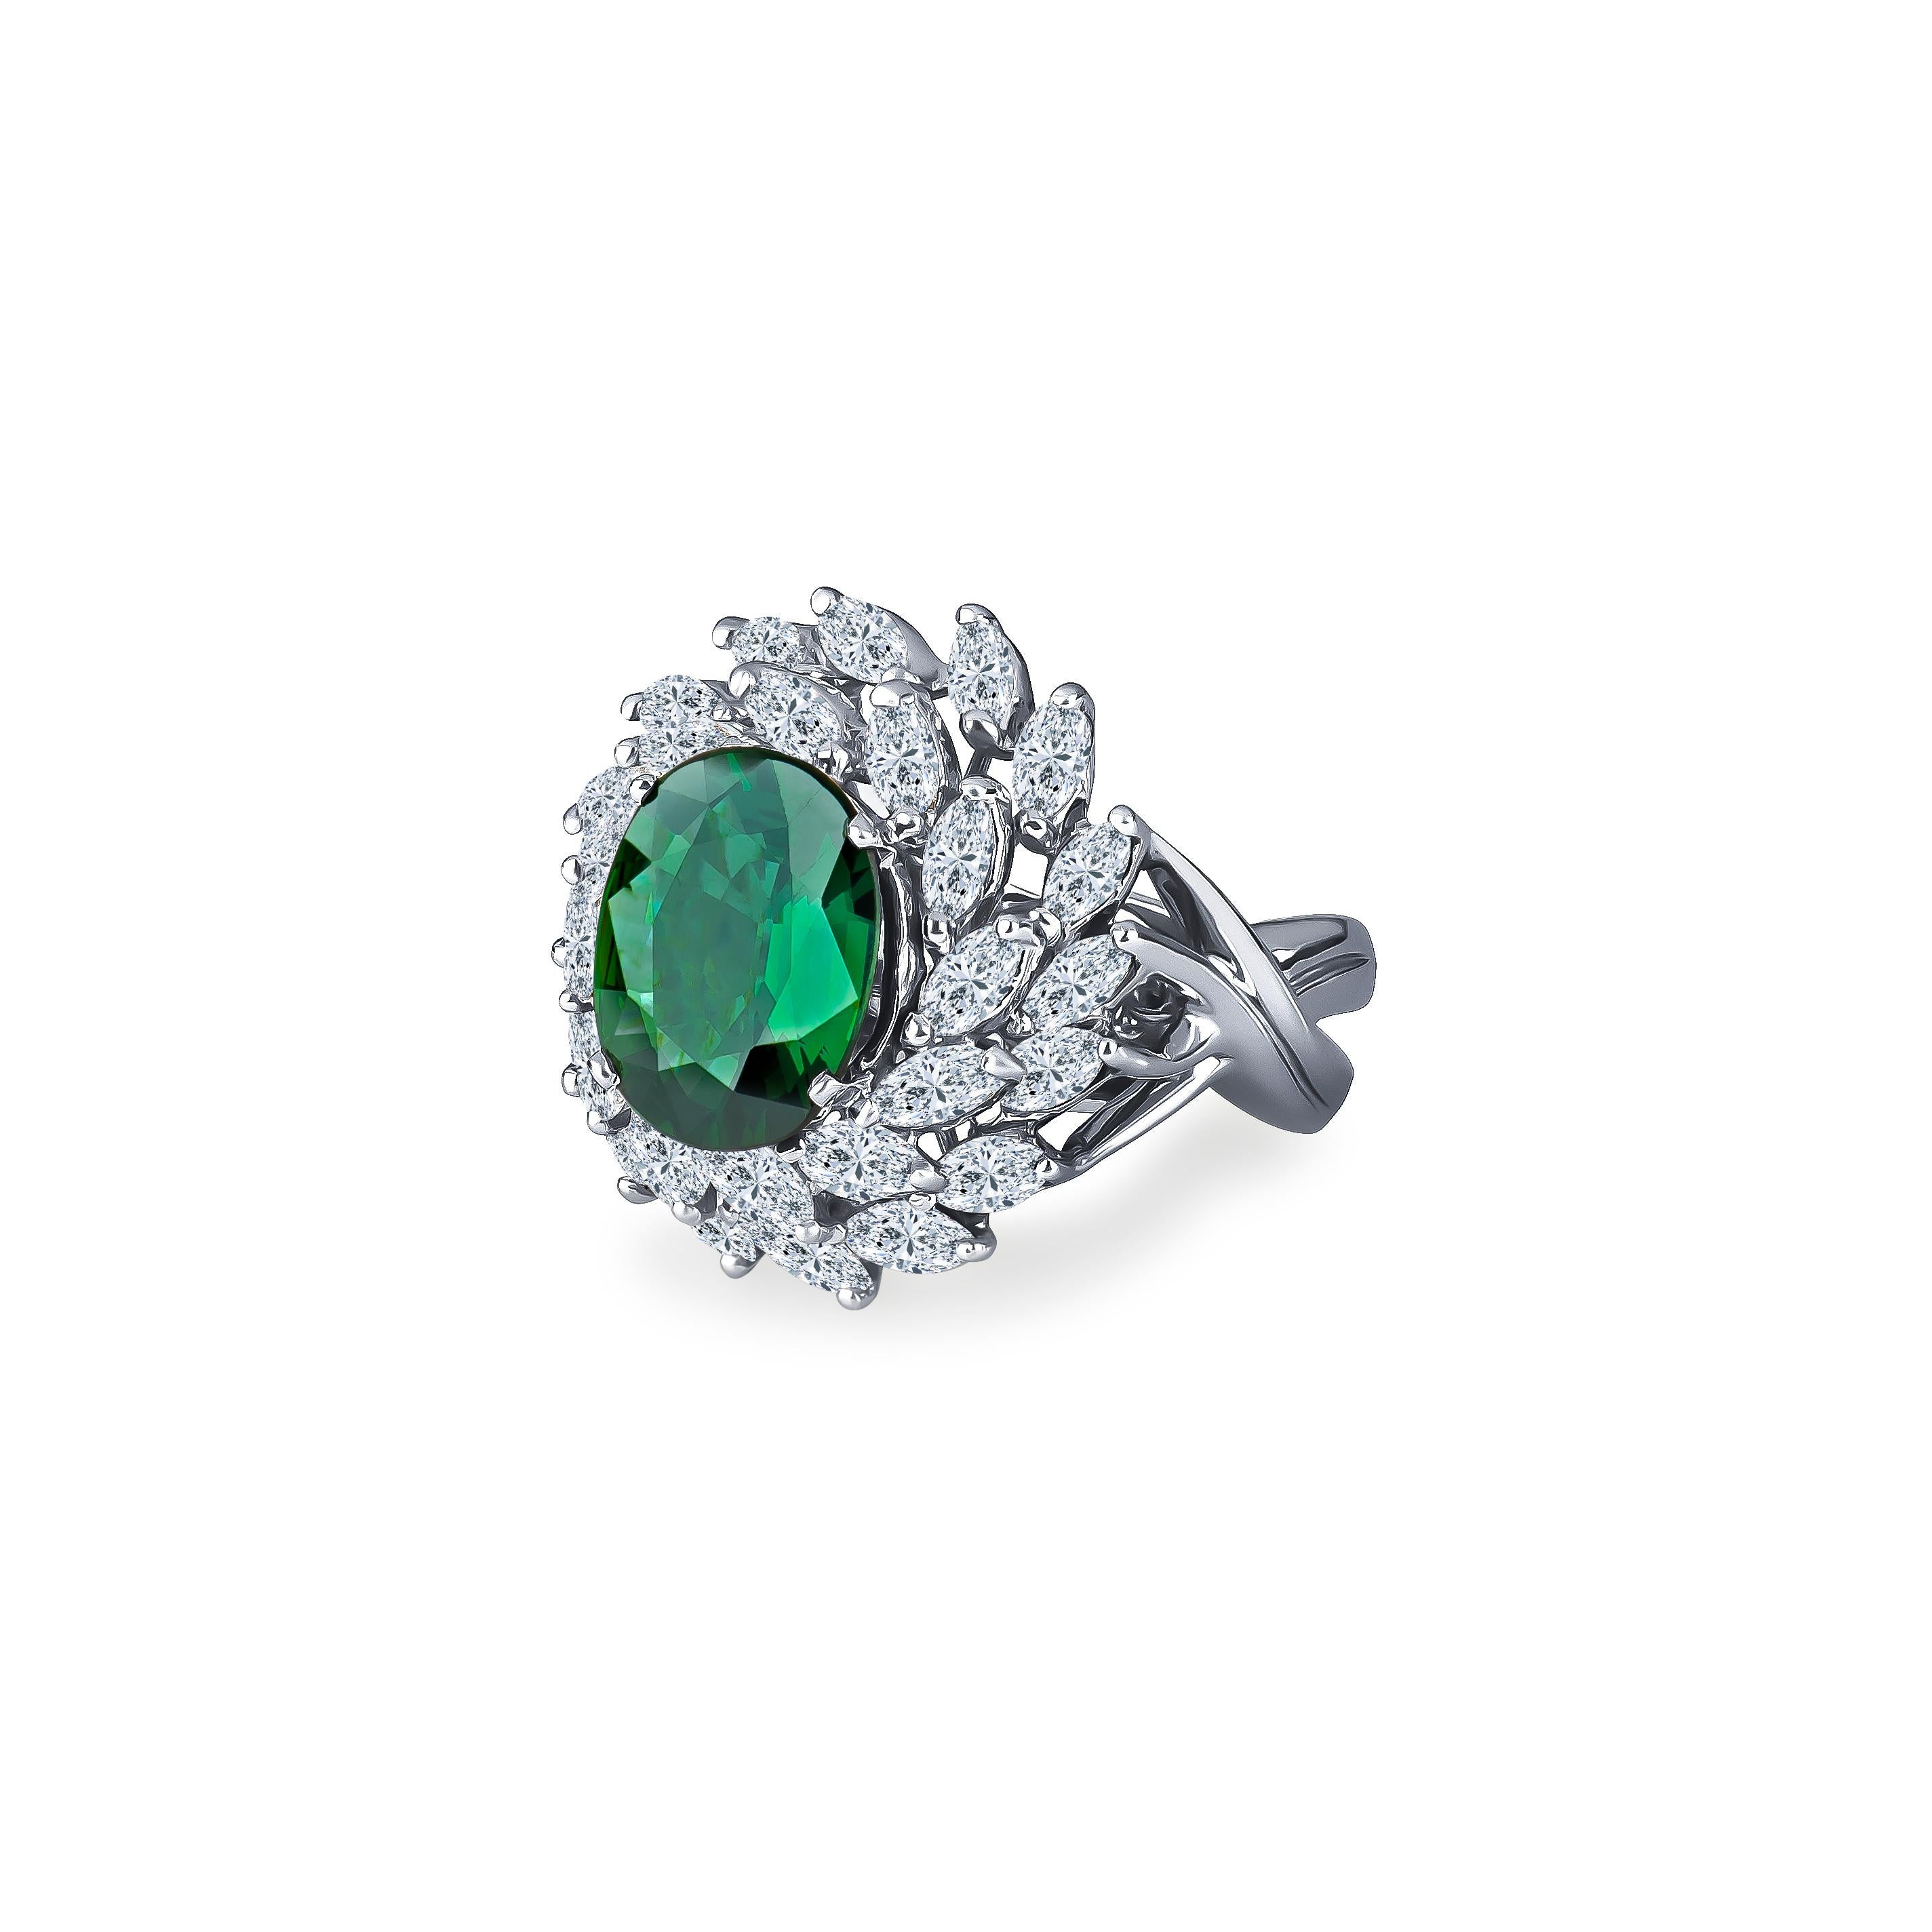 This amazing cocktail ring features a 4.62 carat oval, step cut green sapphire surrounded by 2.75 total carats of marquise diamonds set in platinum. This ring is currently a size 6 but can be resized upon request. 
Sapphire Measurements: